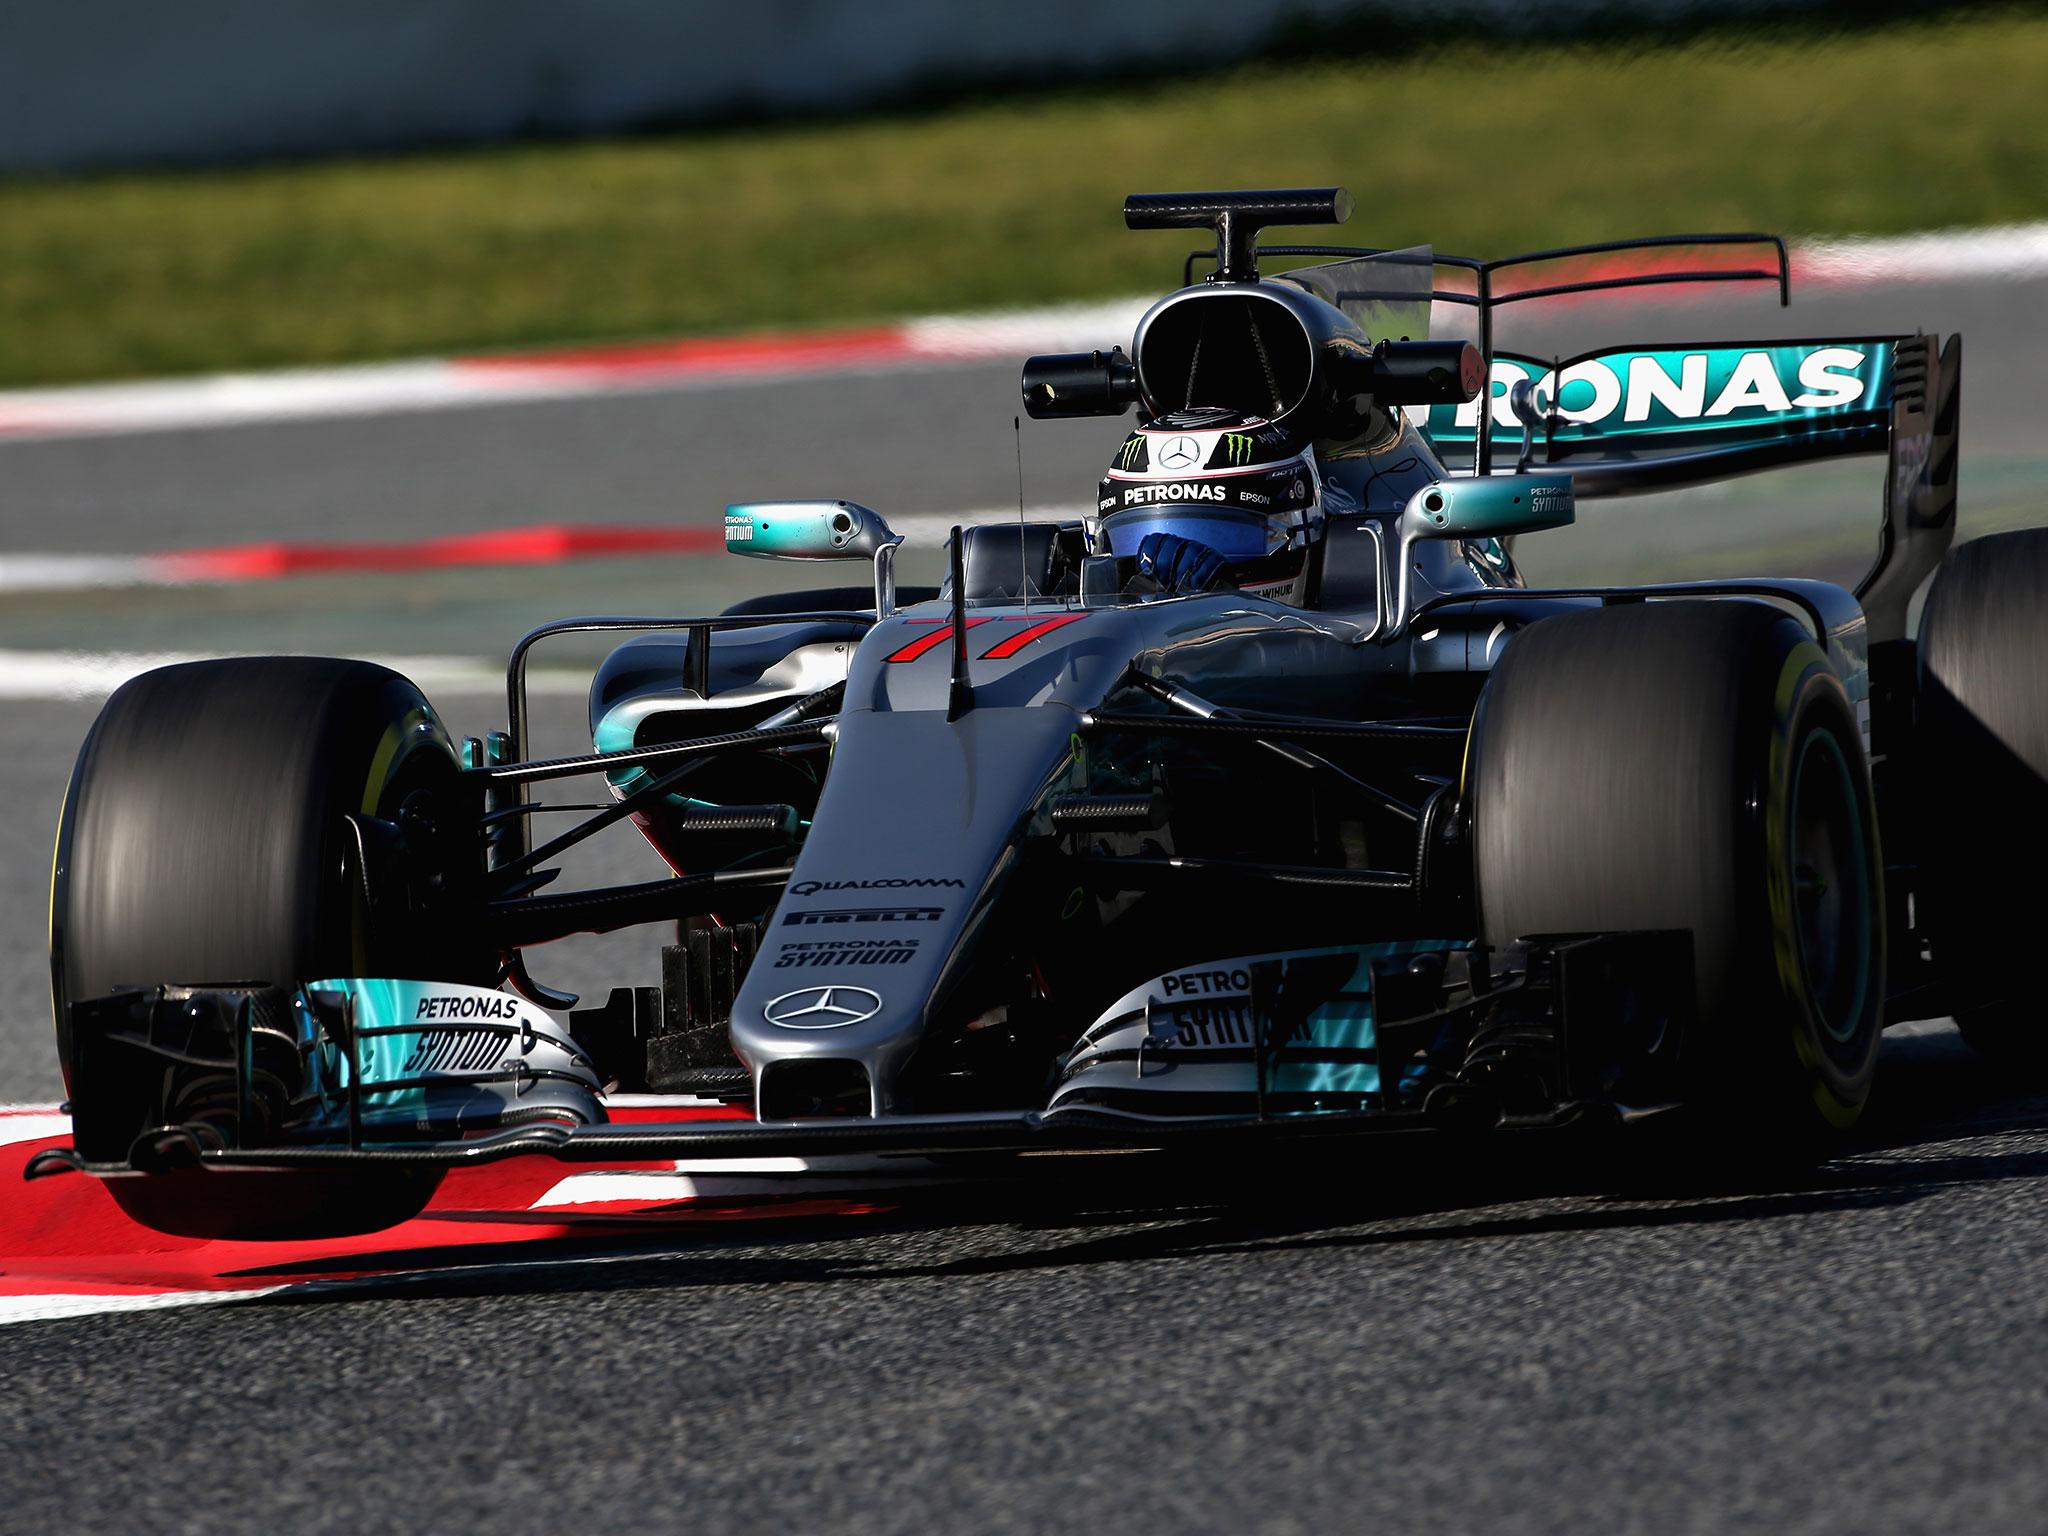 Valtteri Bottas is determined in his first year with Mercedes